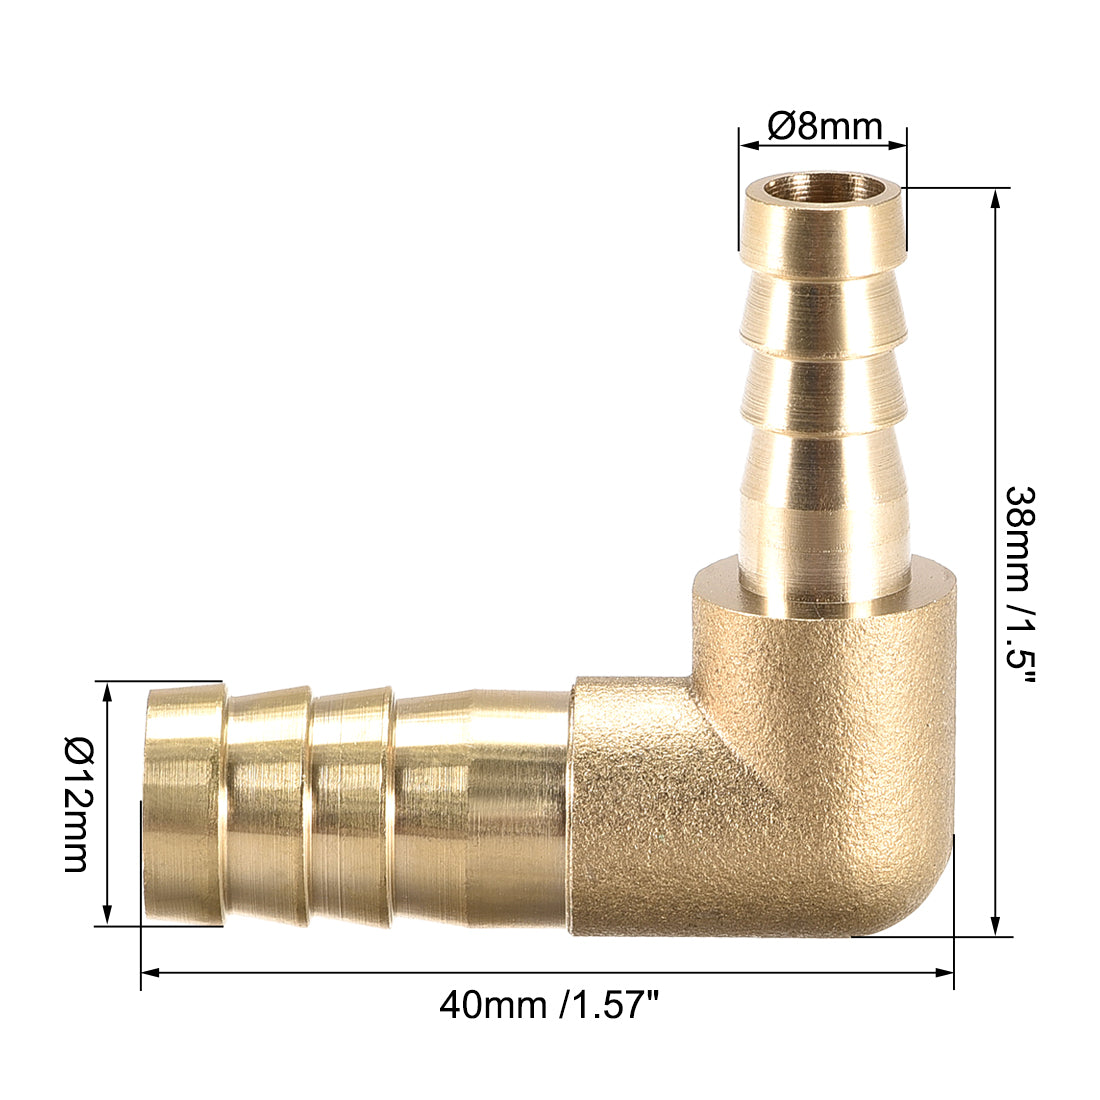 uxcell Uxcell 12mm to 8mm Barb Brass Hose Fitting 90 Degree Elbow Pipe Connector Coupler 2pcs